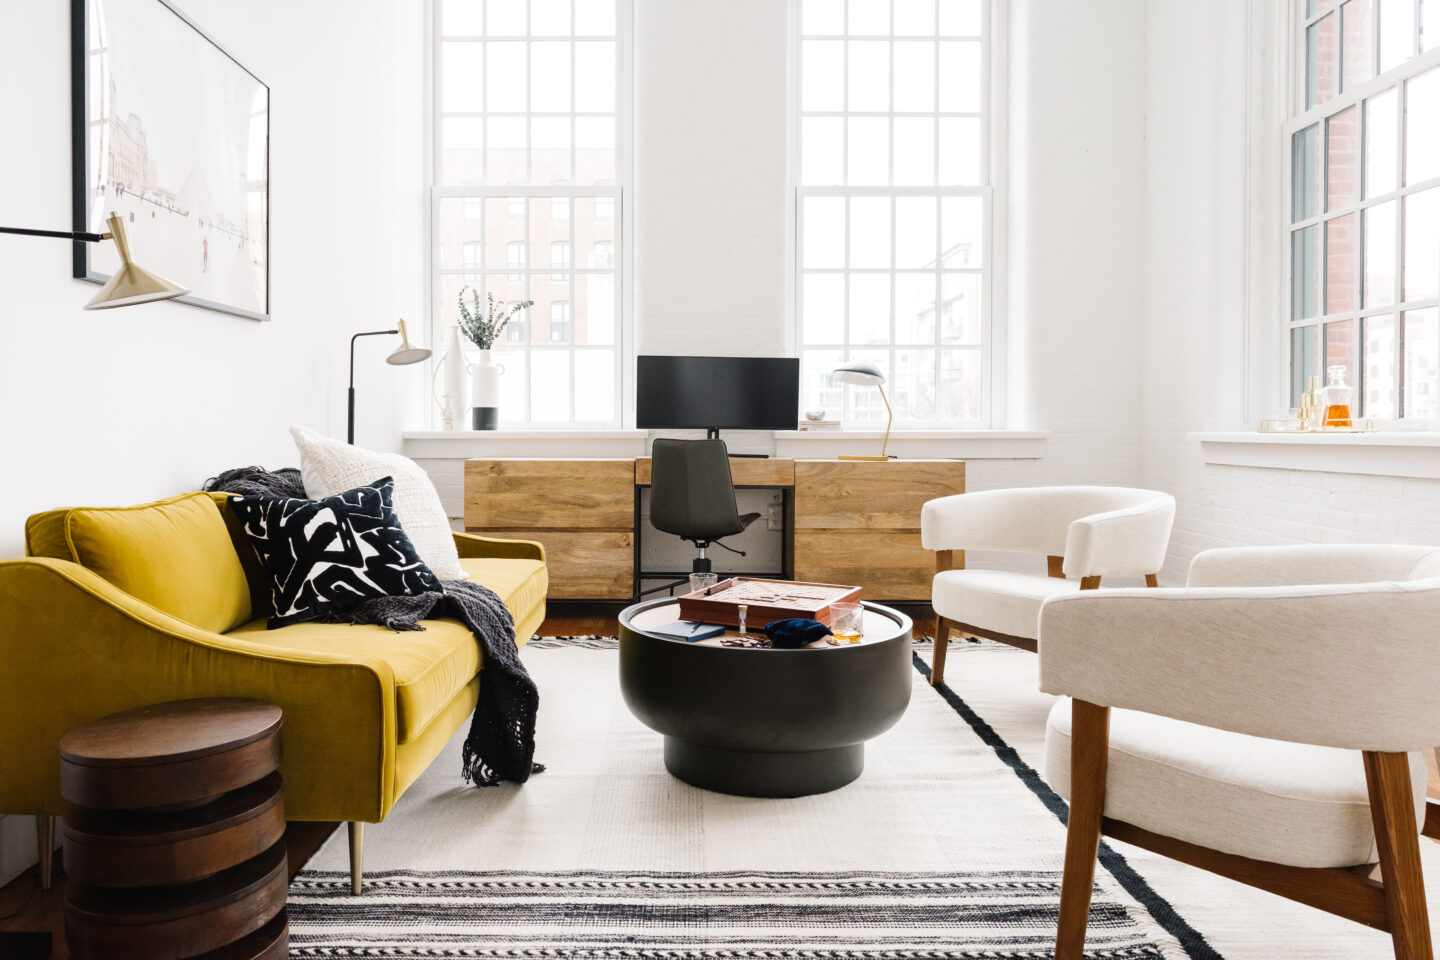 West Elm Room Reveal! – Our Brooklyn Industrial Apartment - with